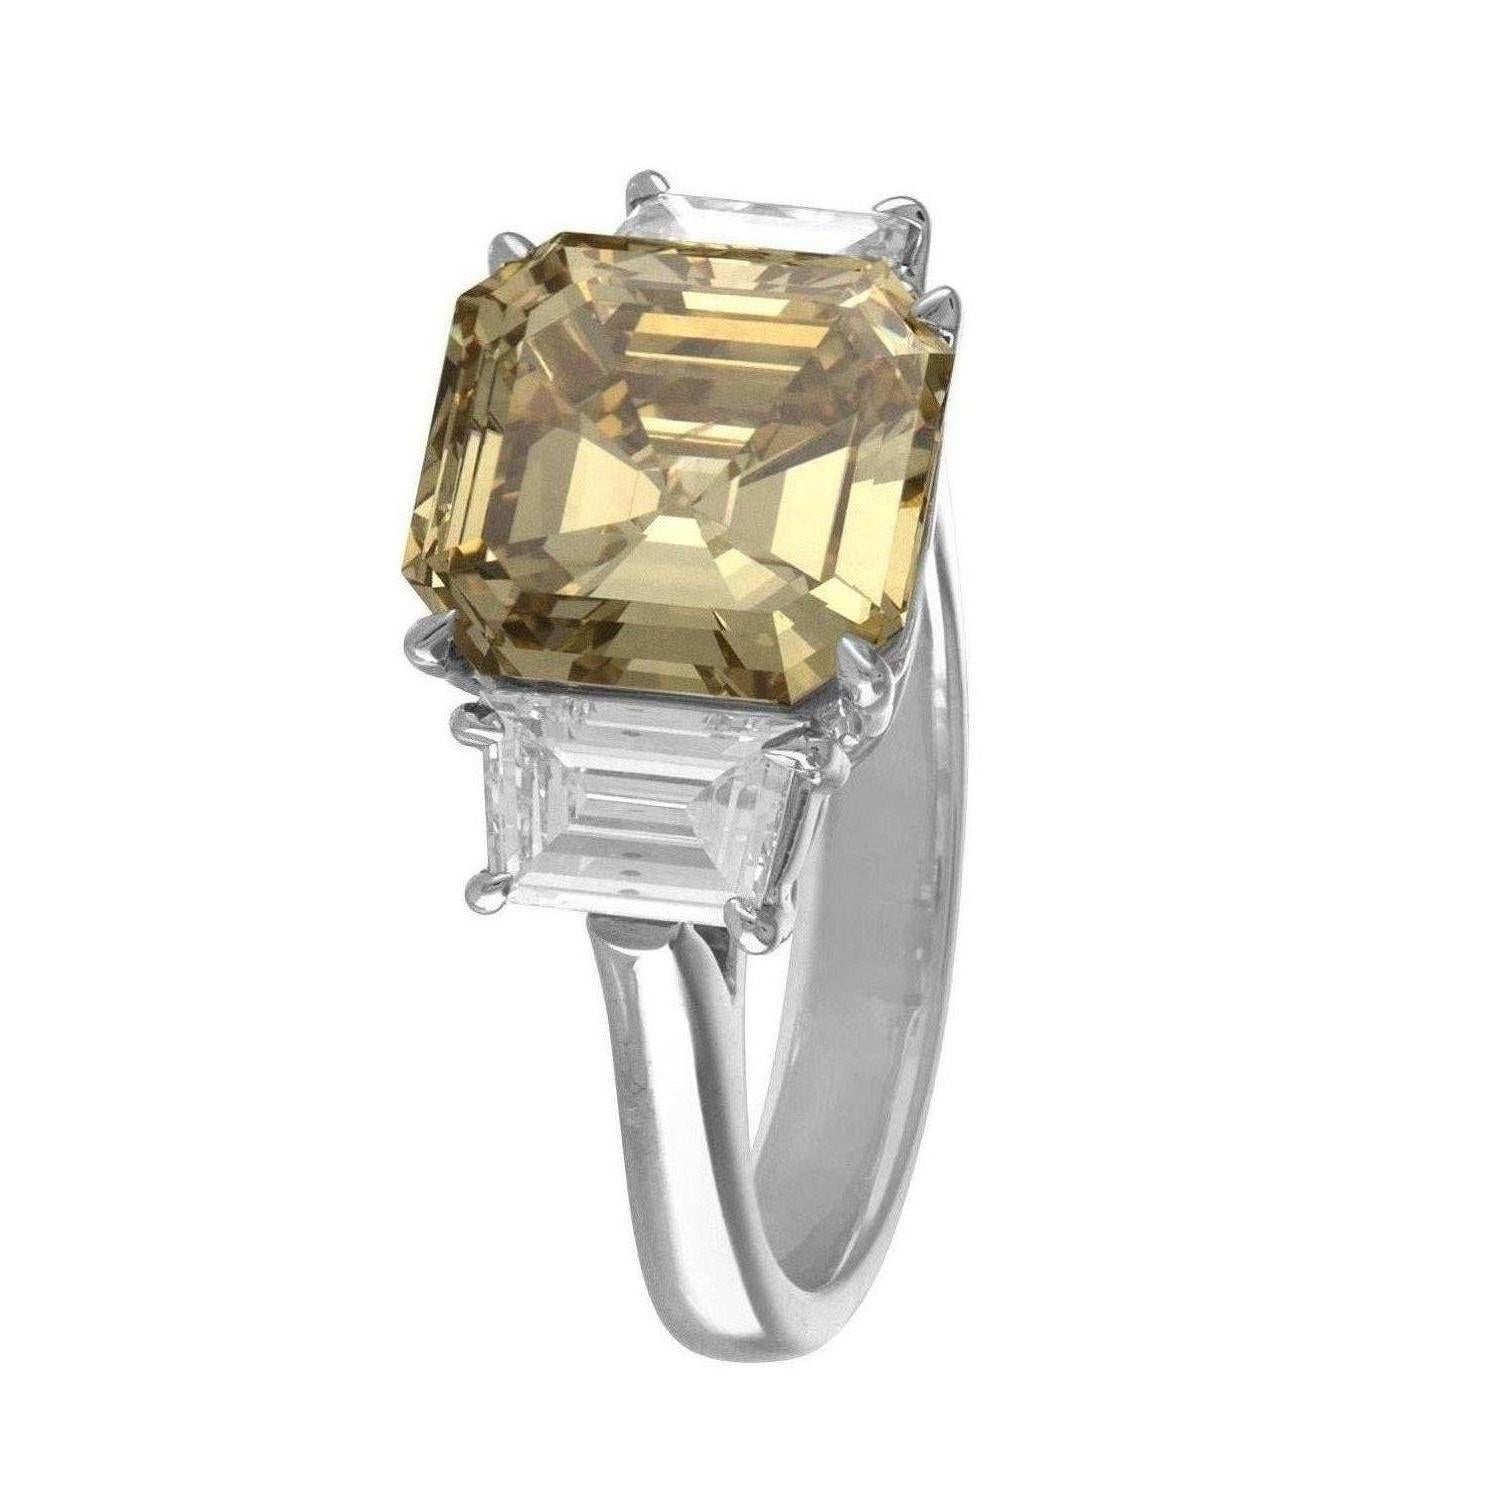 4.76 Carat Square Emerald Cut Diamond is set in a Three Stone Platinum & 18K Yellow Gold Ring. The Square Emerald is Certified as Fancy Deep Brownish Yellow in Color and SI1 in Clarity.  On the Sides of the Center there are Two Step Cut Trapezoids.